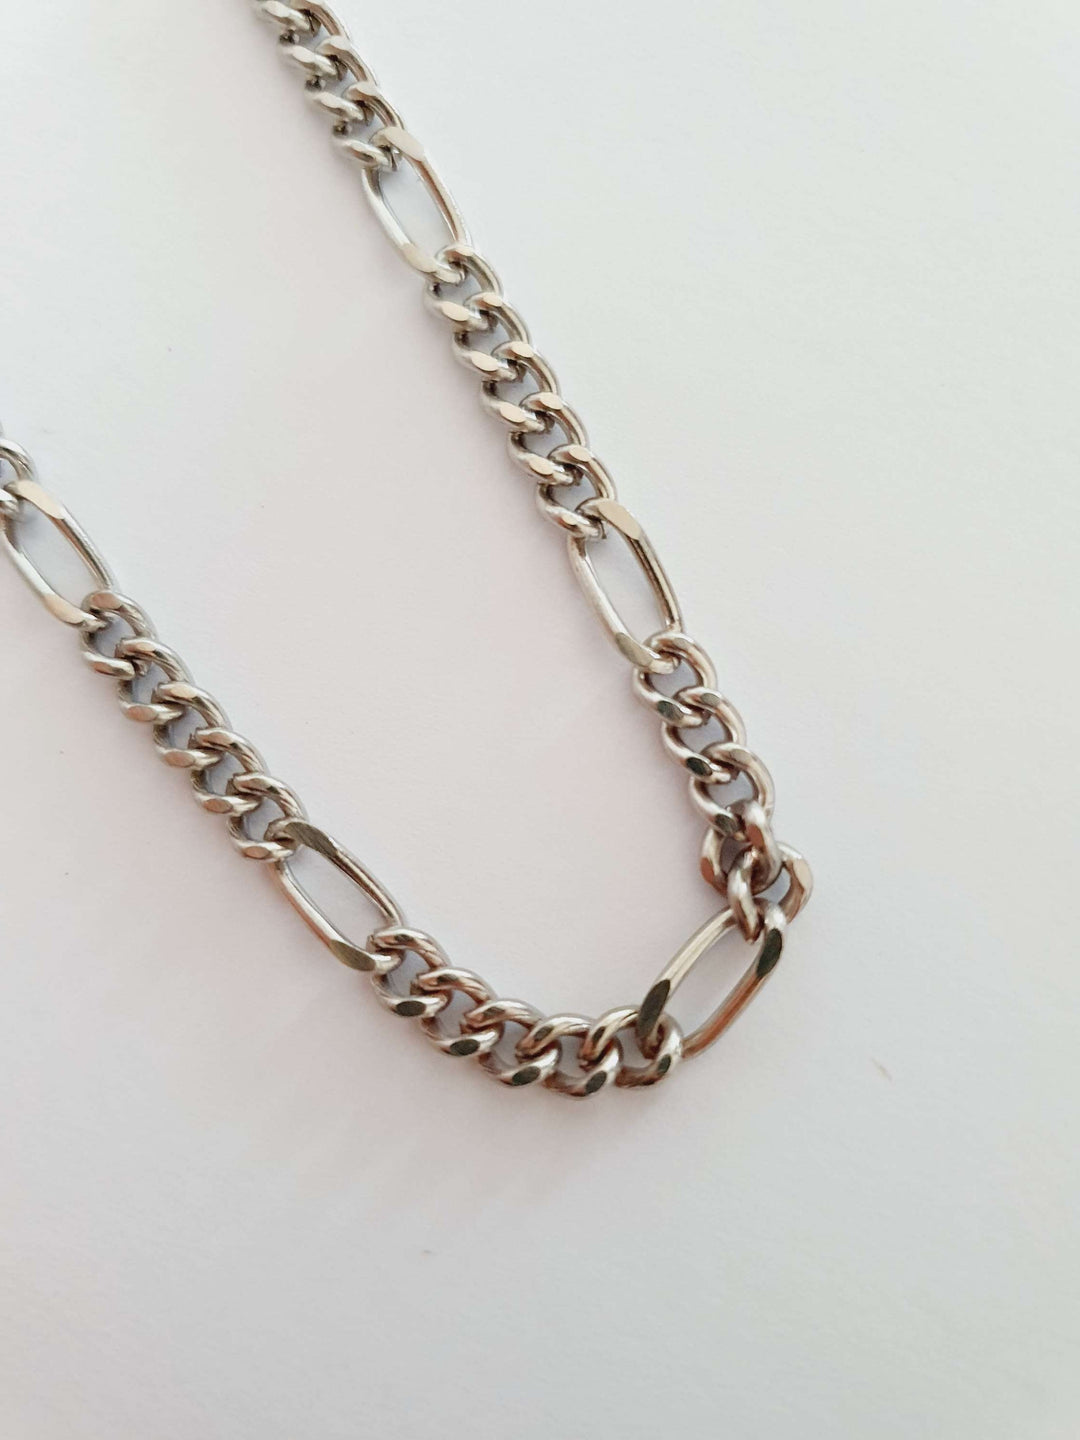 Vintage Silver Plated Chain Necklace